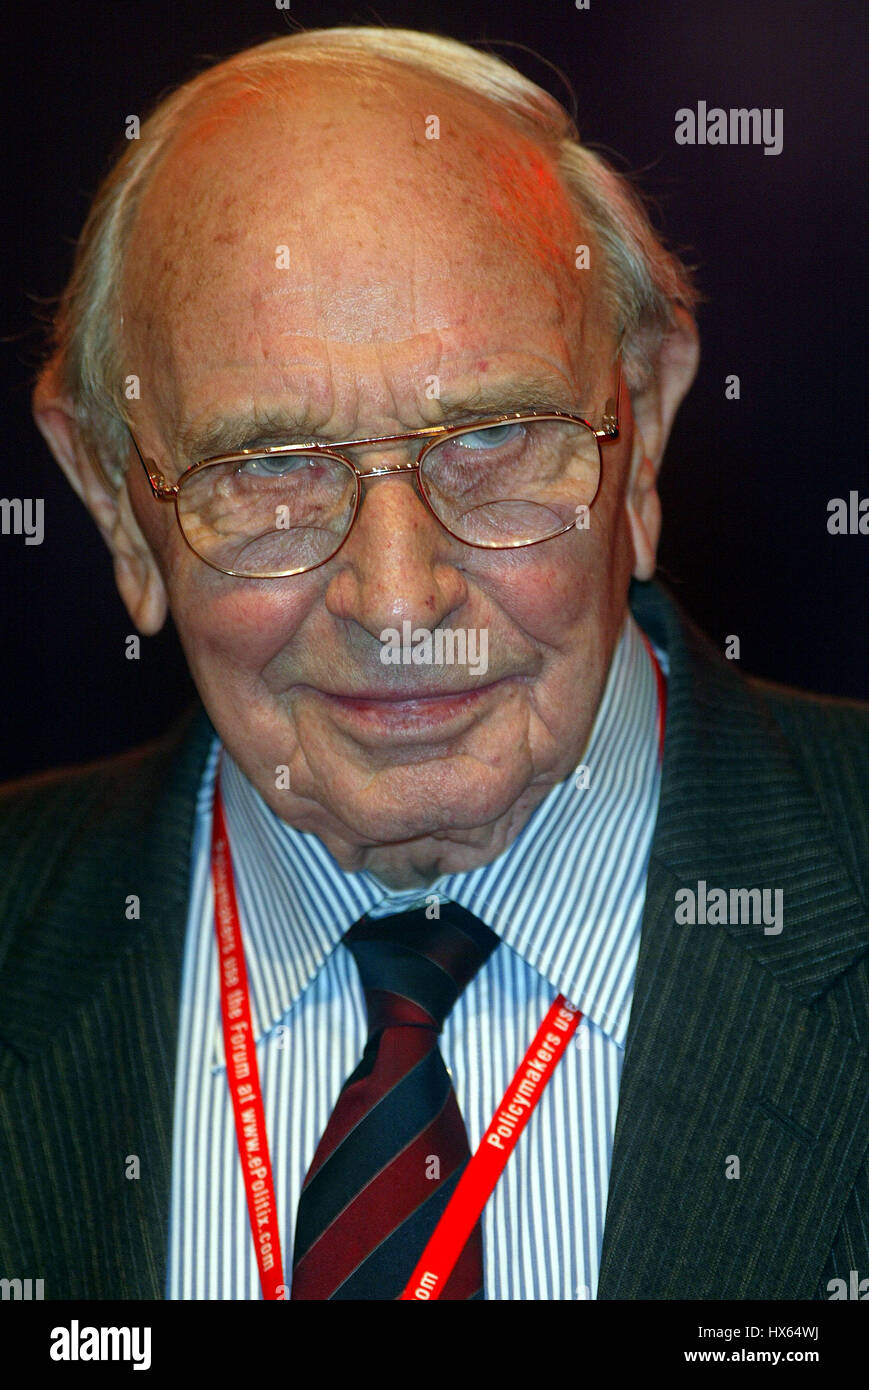 JACK JONES . LABOUR PARTY 03 October 2002 LABOUR PARTY CONFERENCE 2002 BLACKPOOL ENGLAND Stock Photo